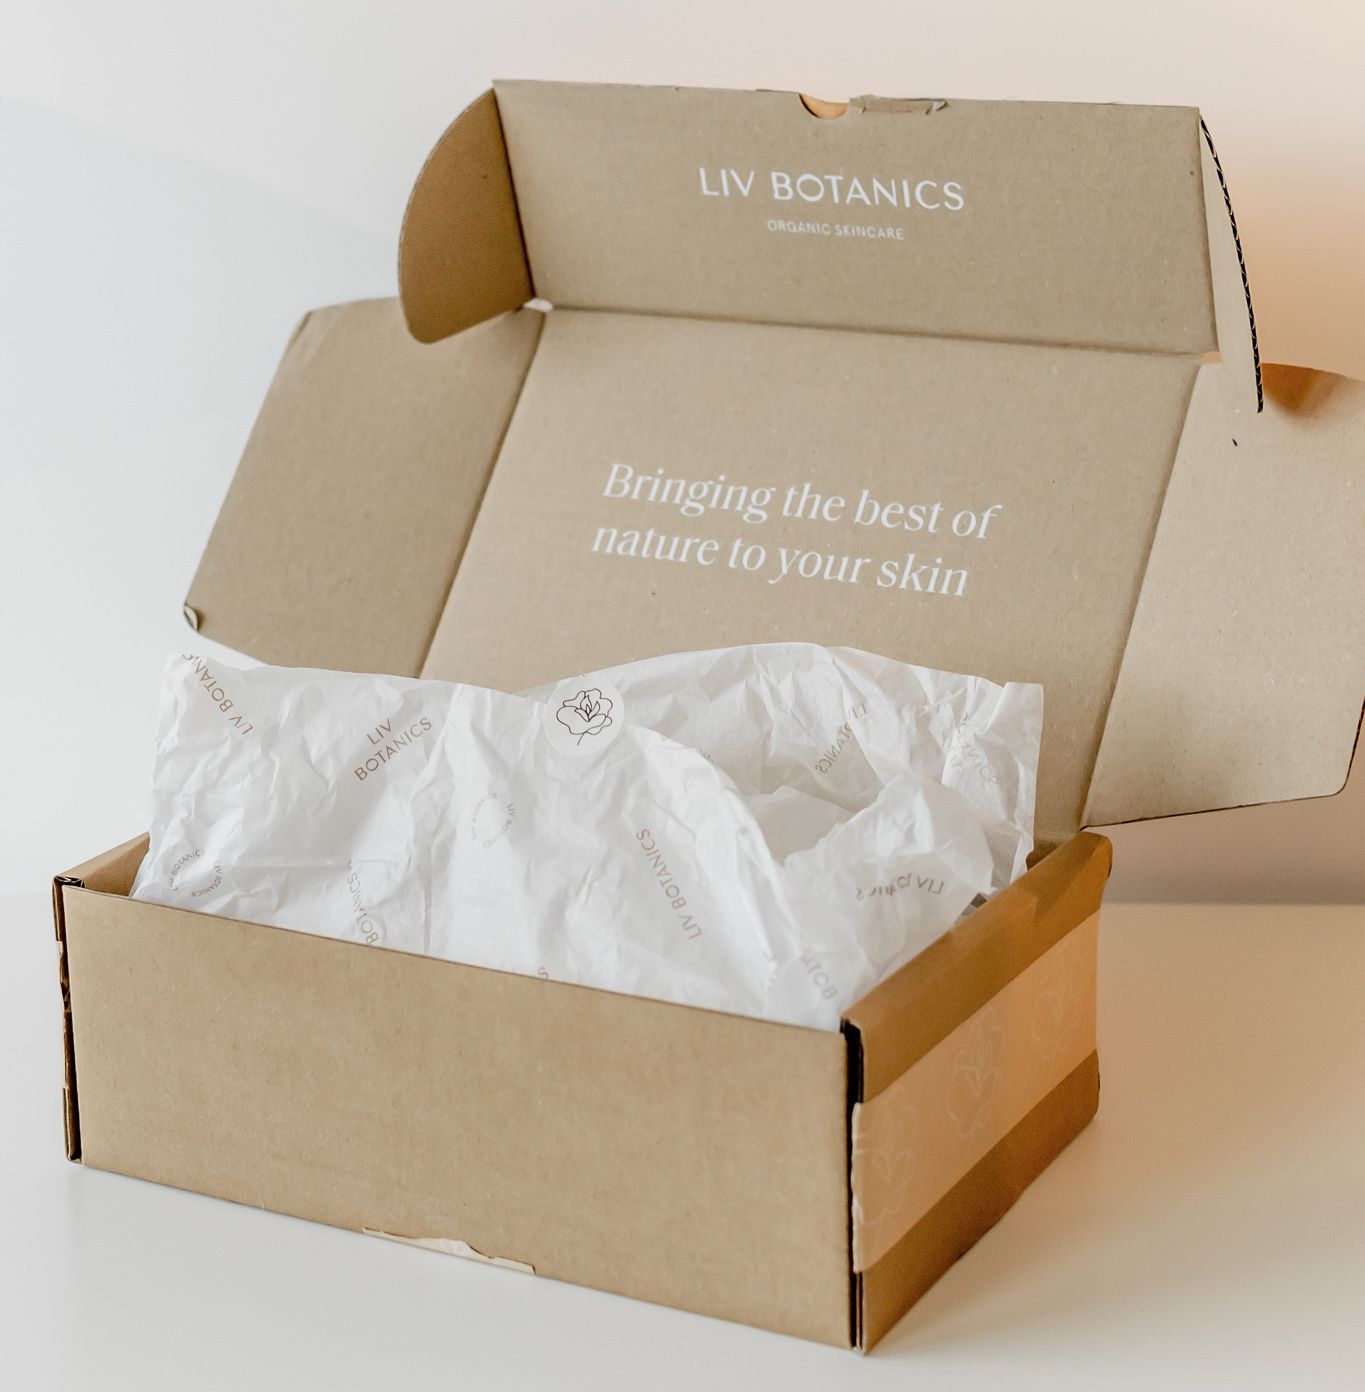 Are Recycled Boxes Cheaper For Your Business?